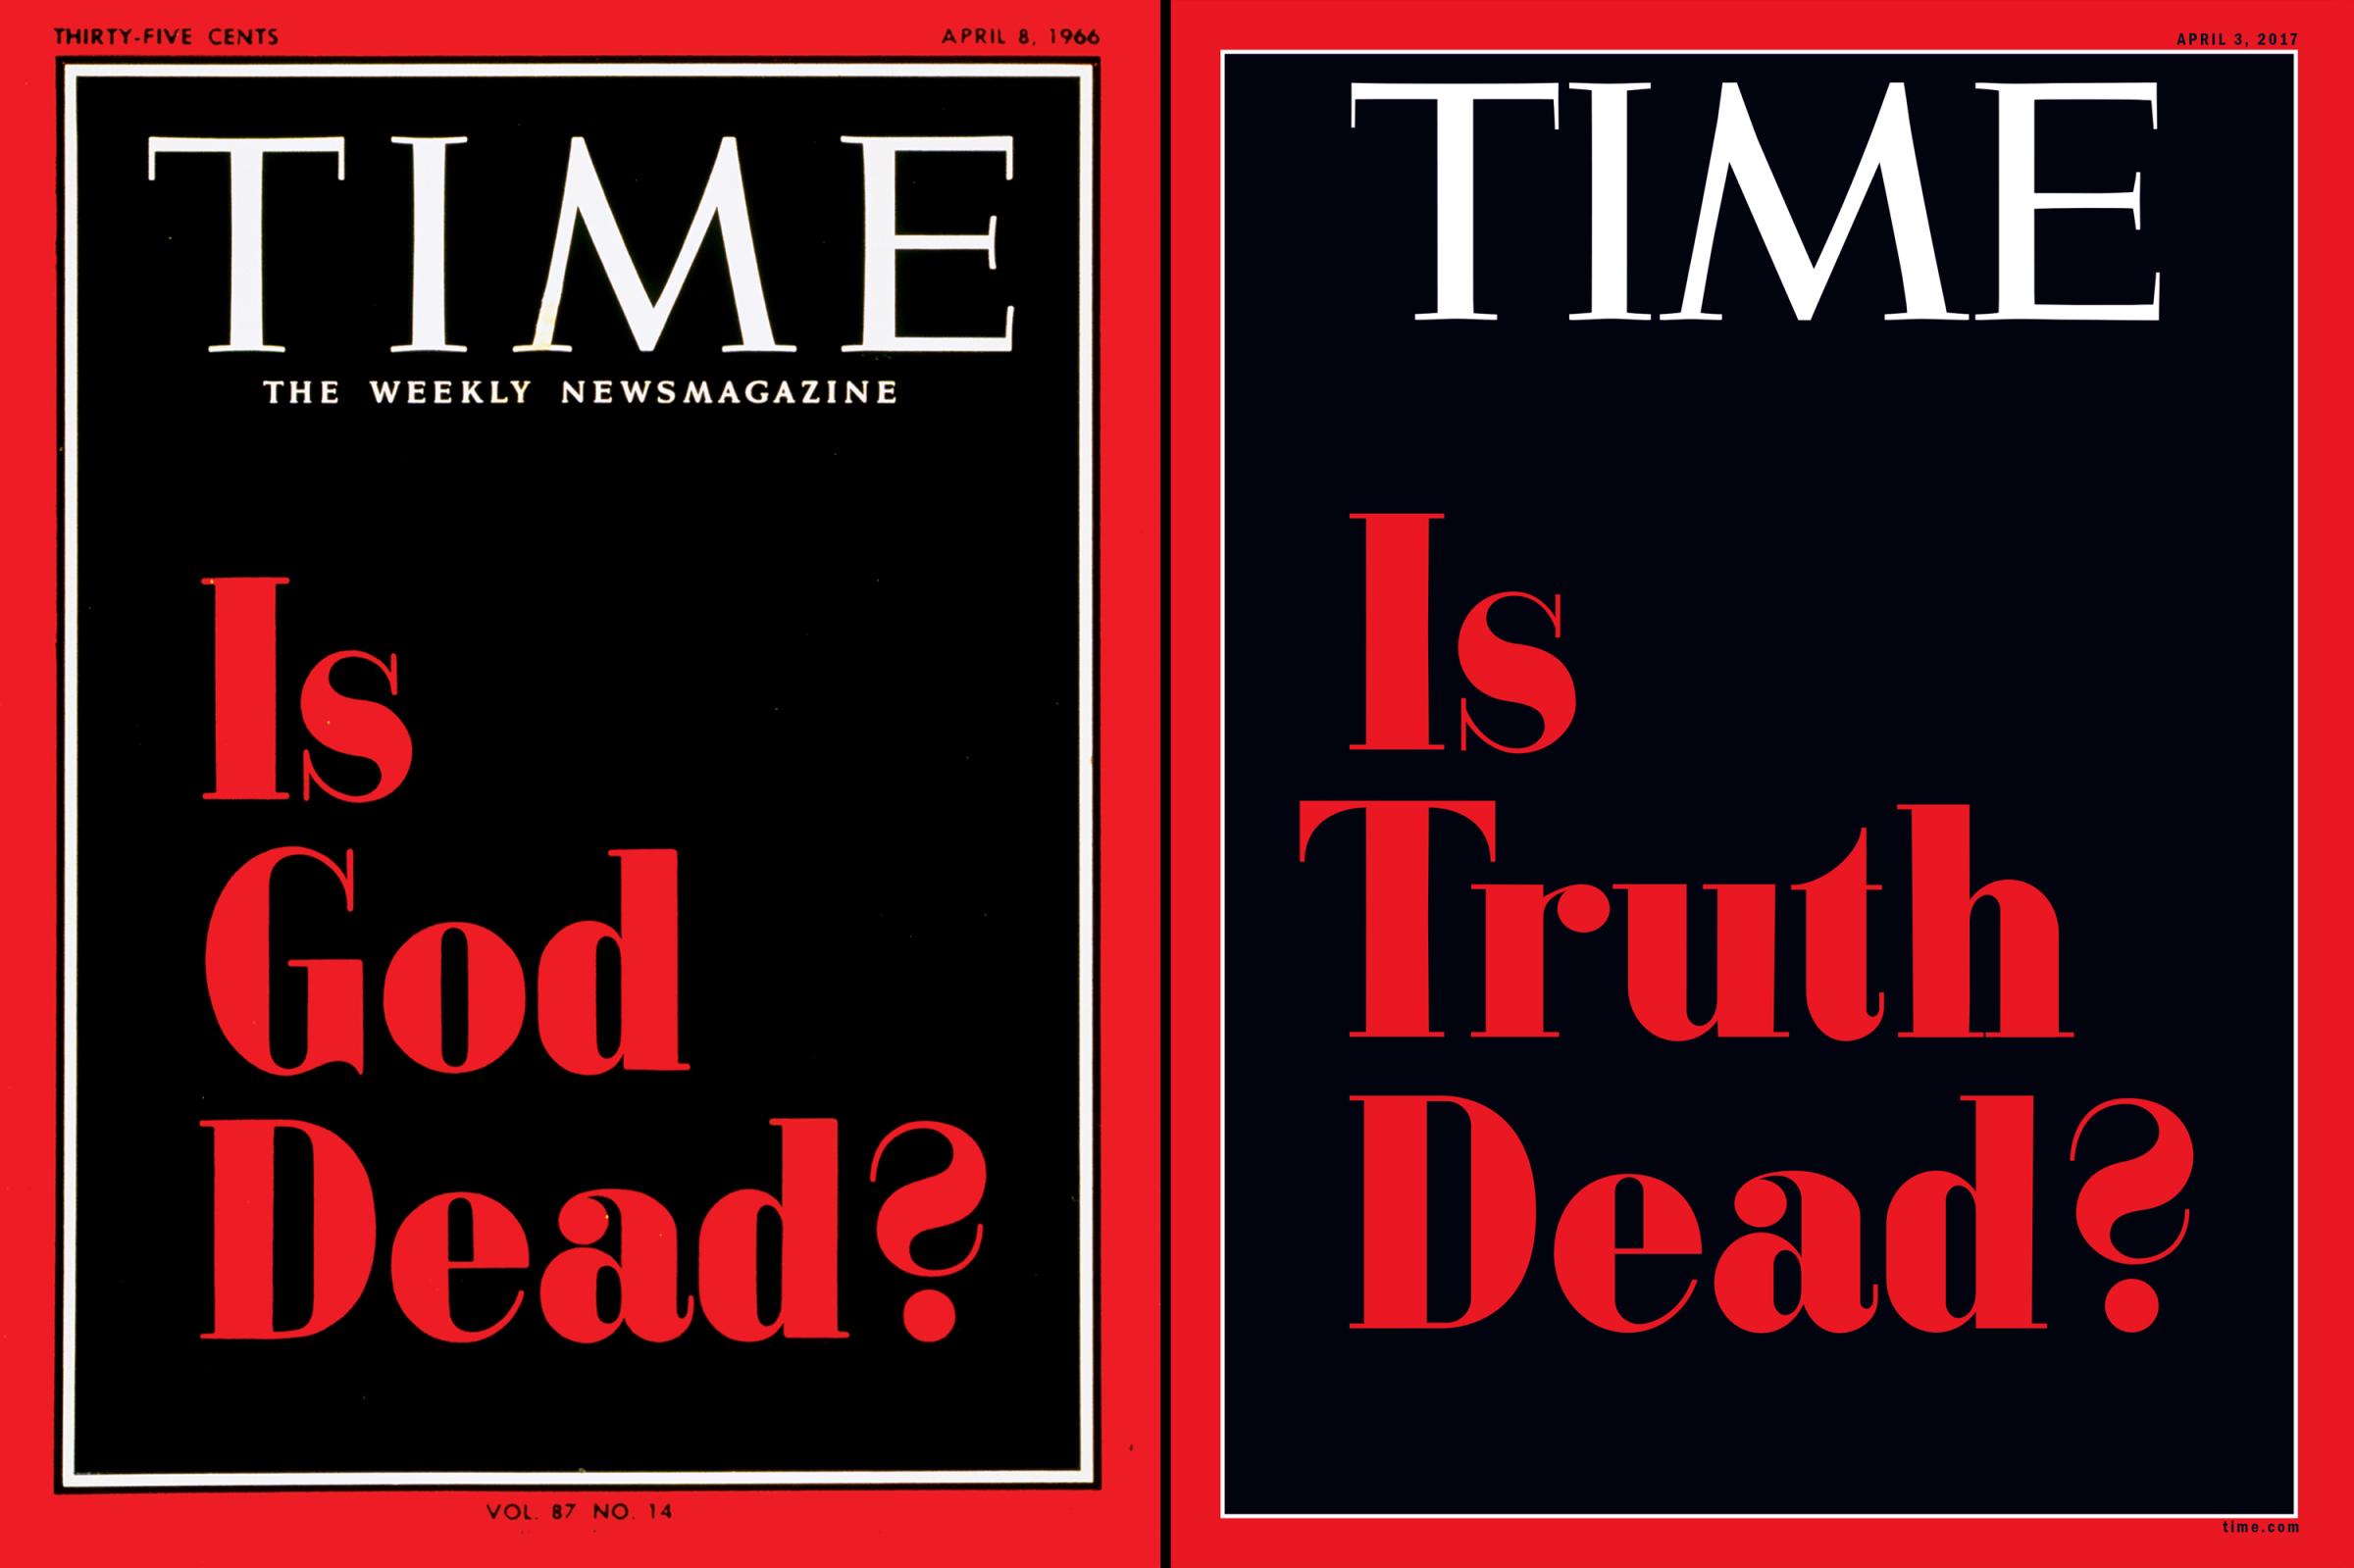 Is God Dead Is Truth Dead covers